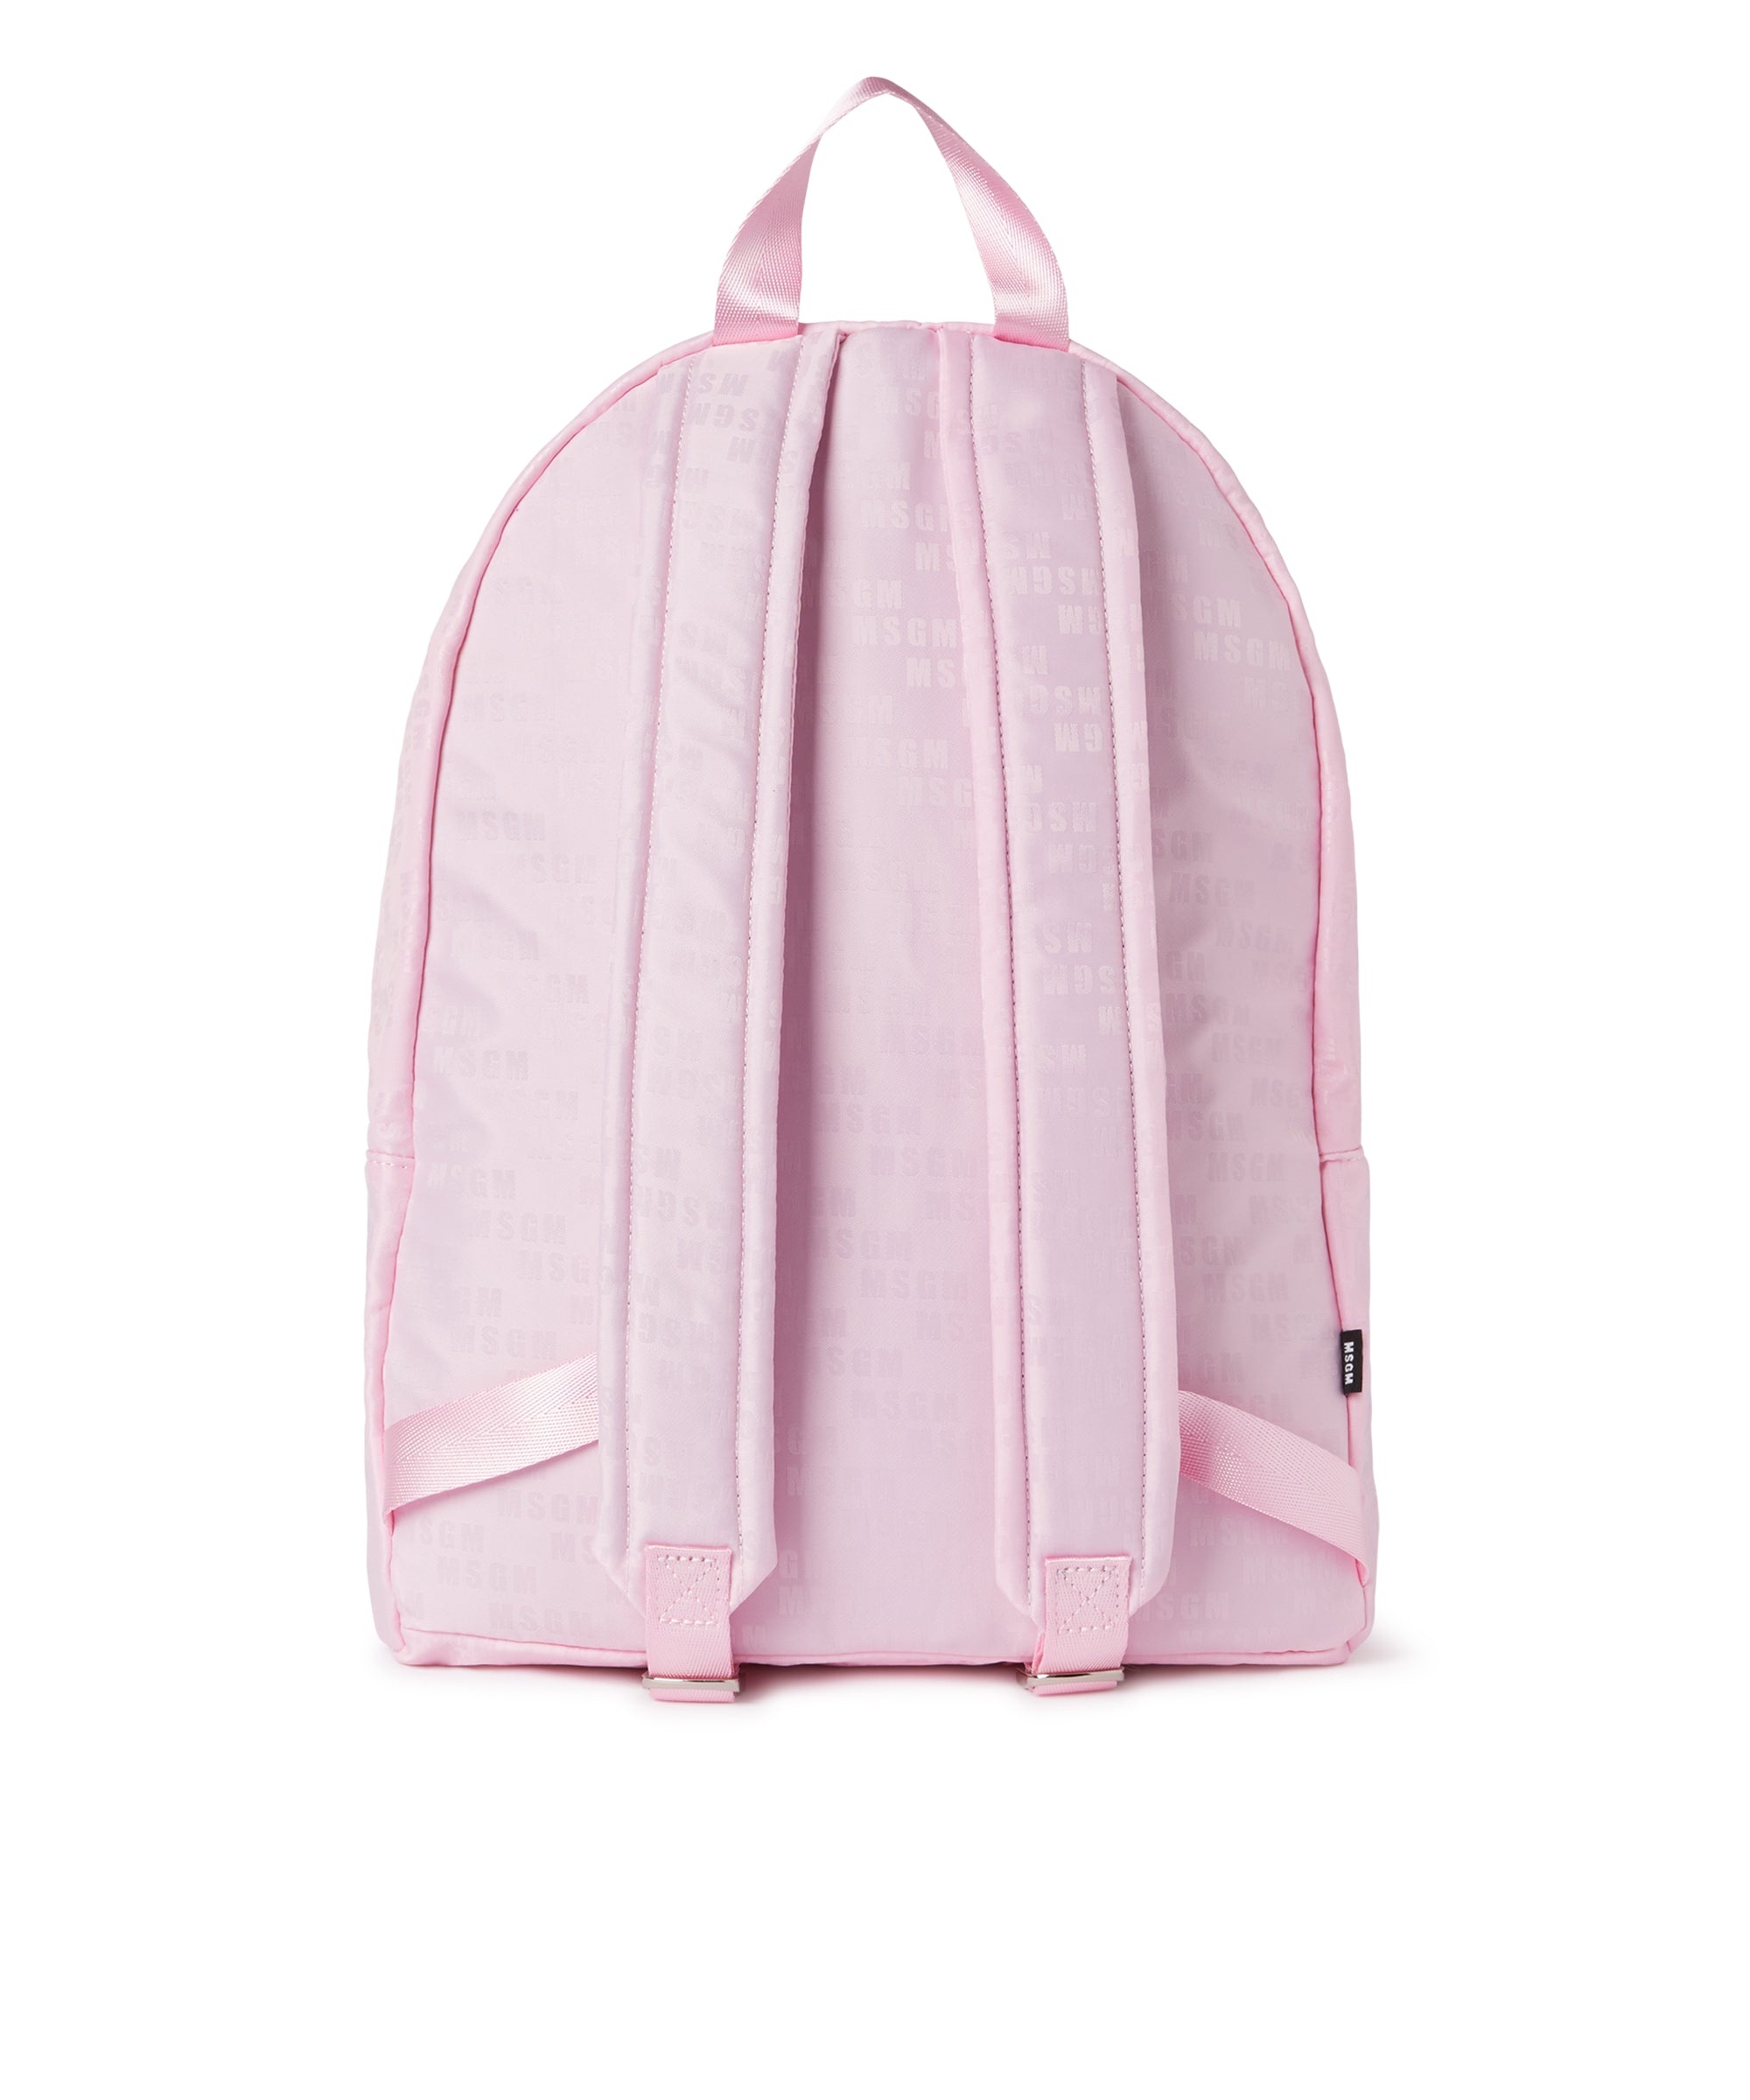 "Signature Iconic Nylon" backpack with all-over print - 2